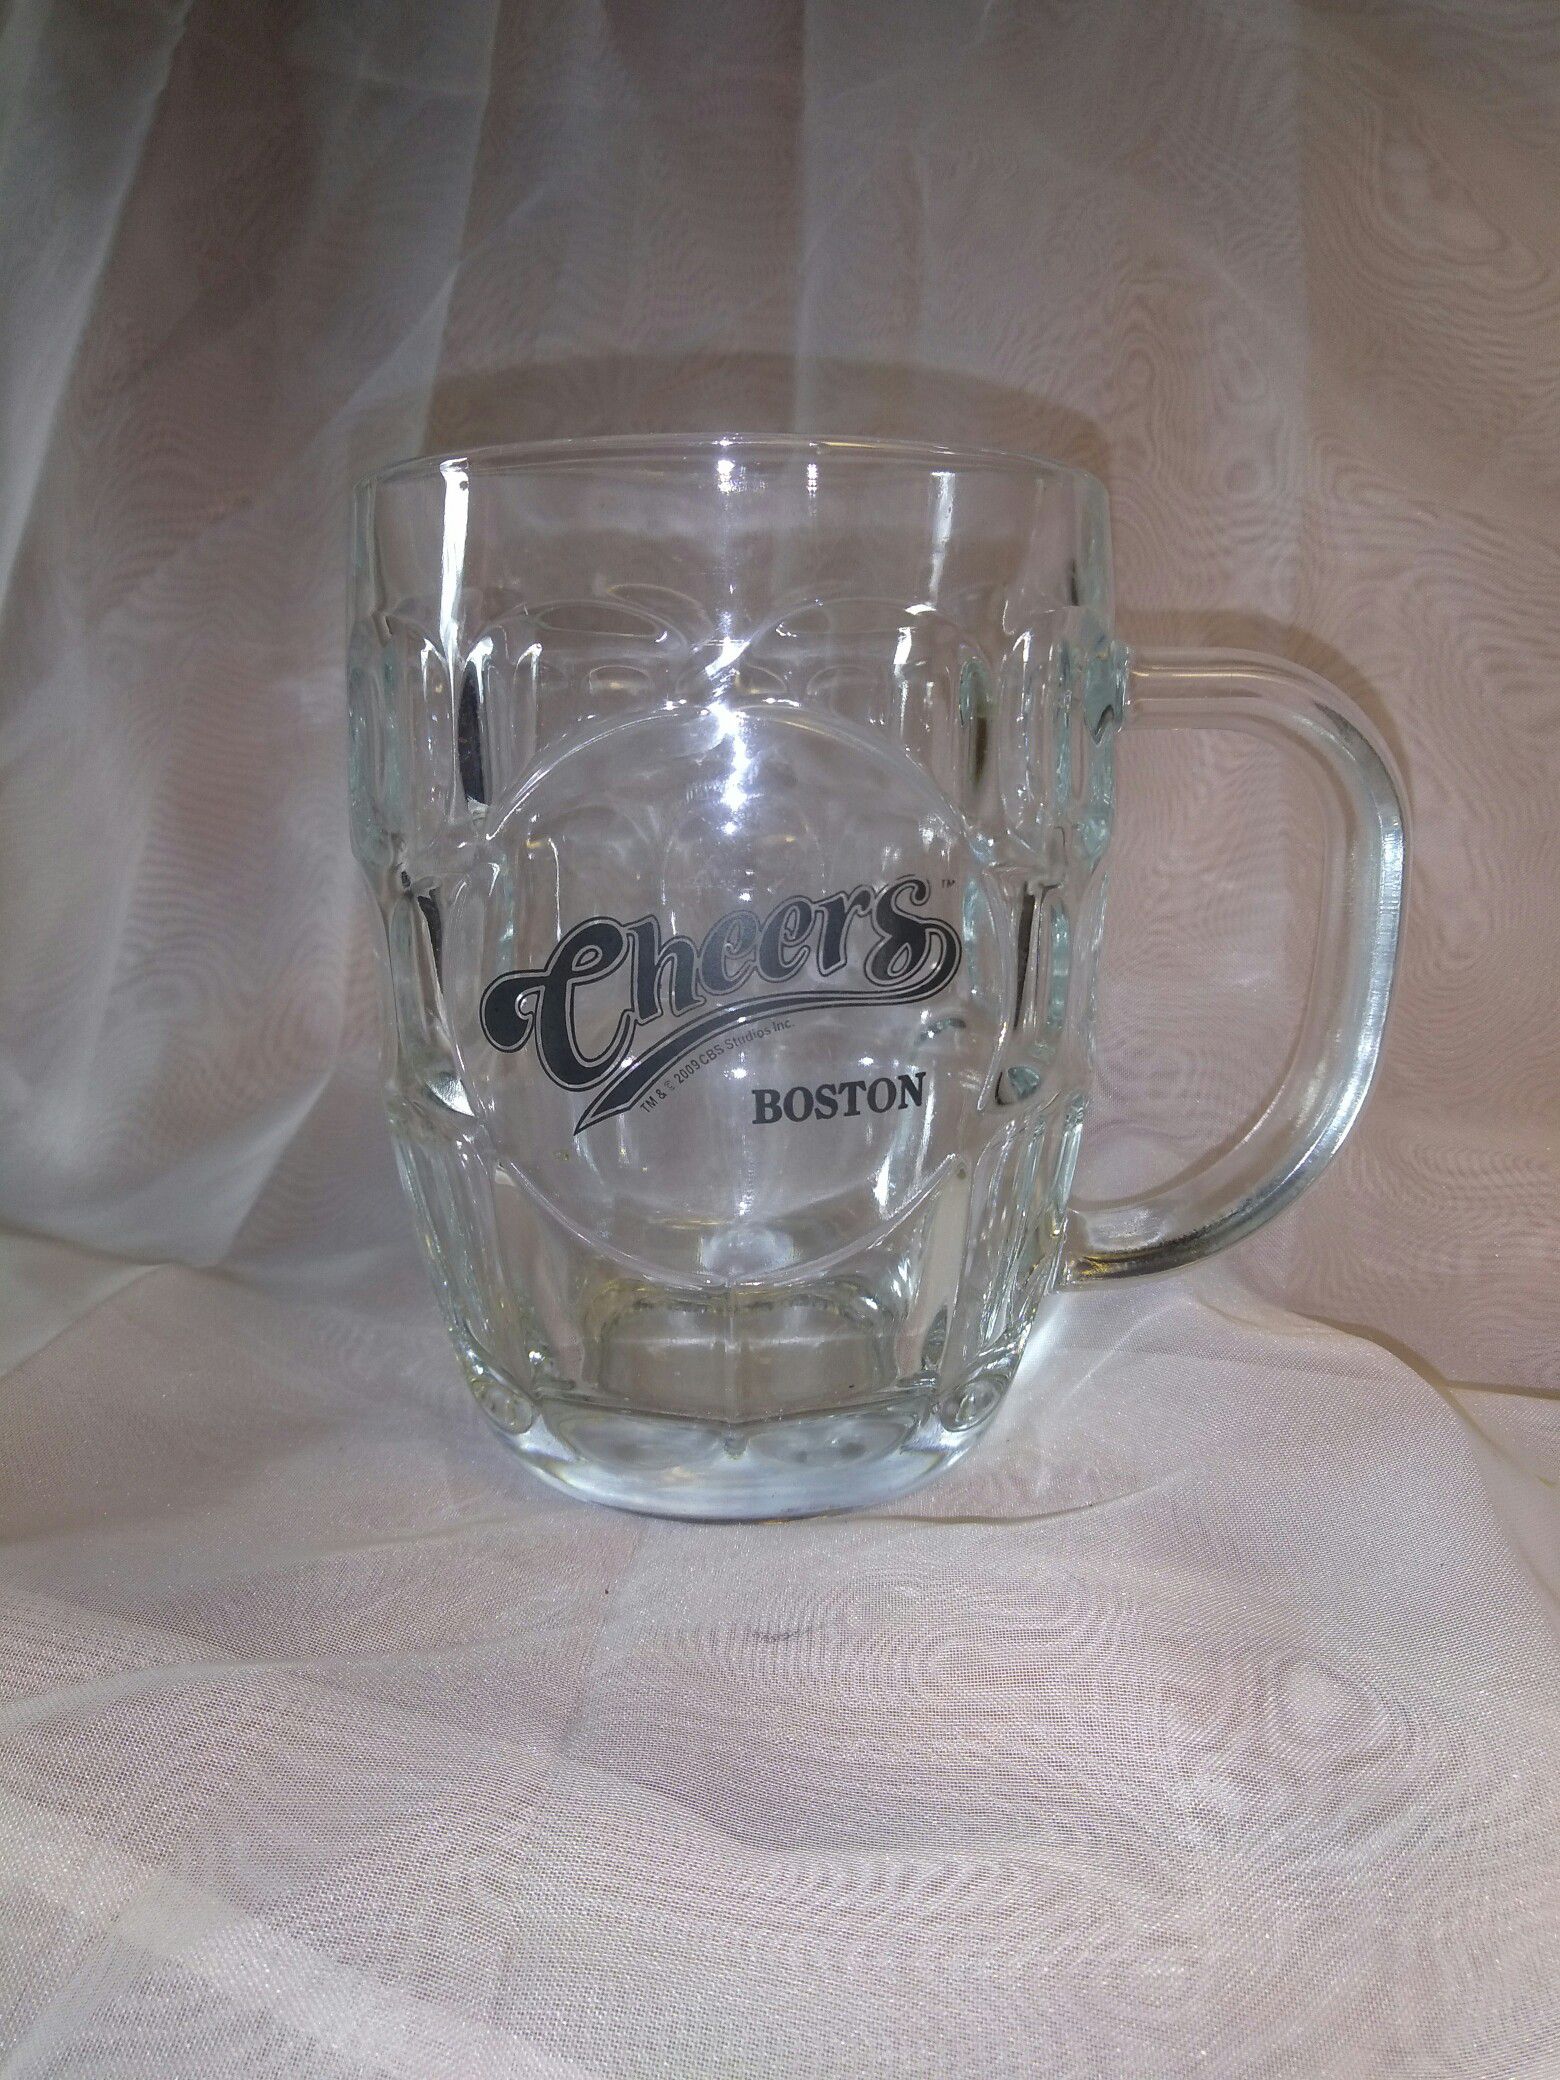 "CHEERS" Boston Clear Glass Excellent !